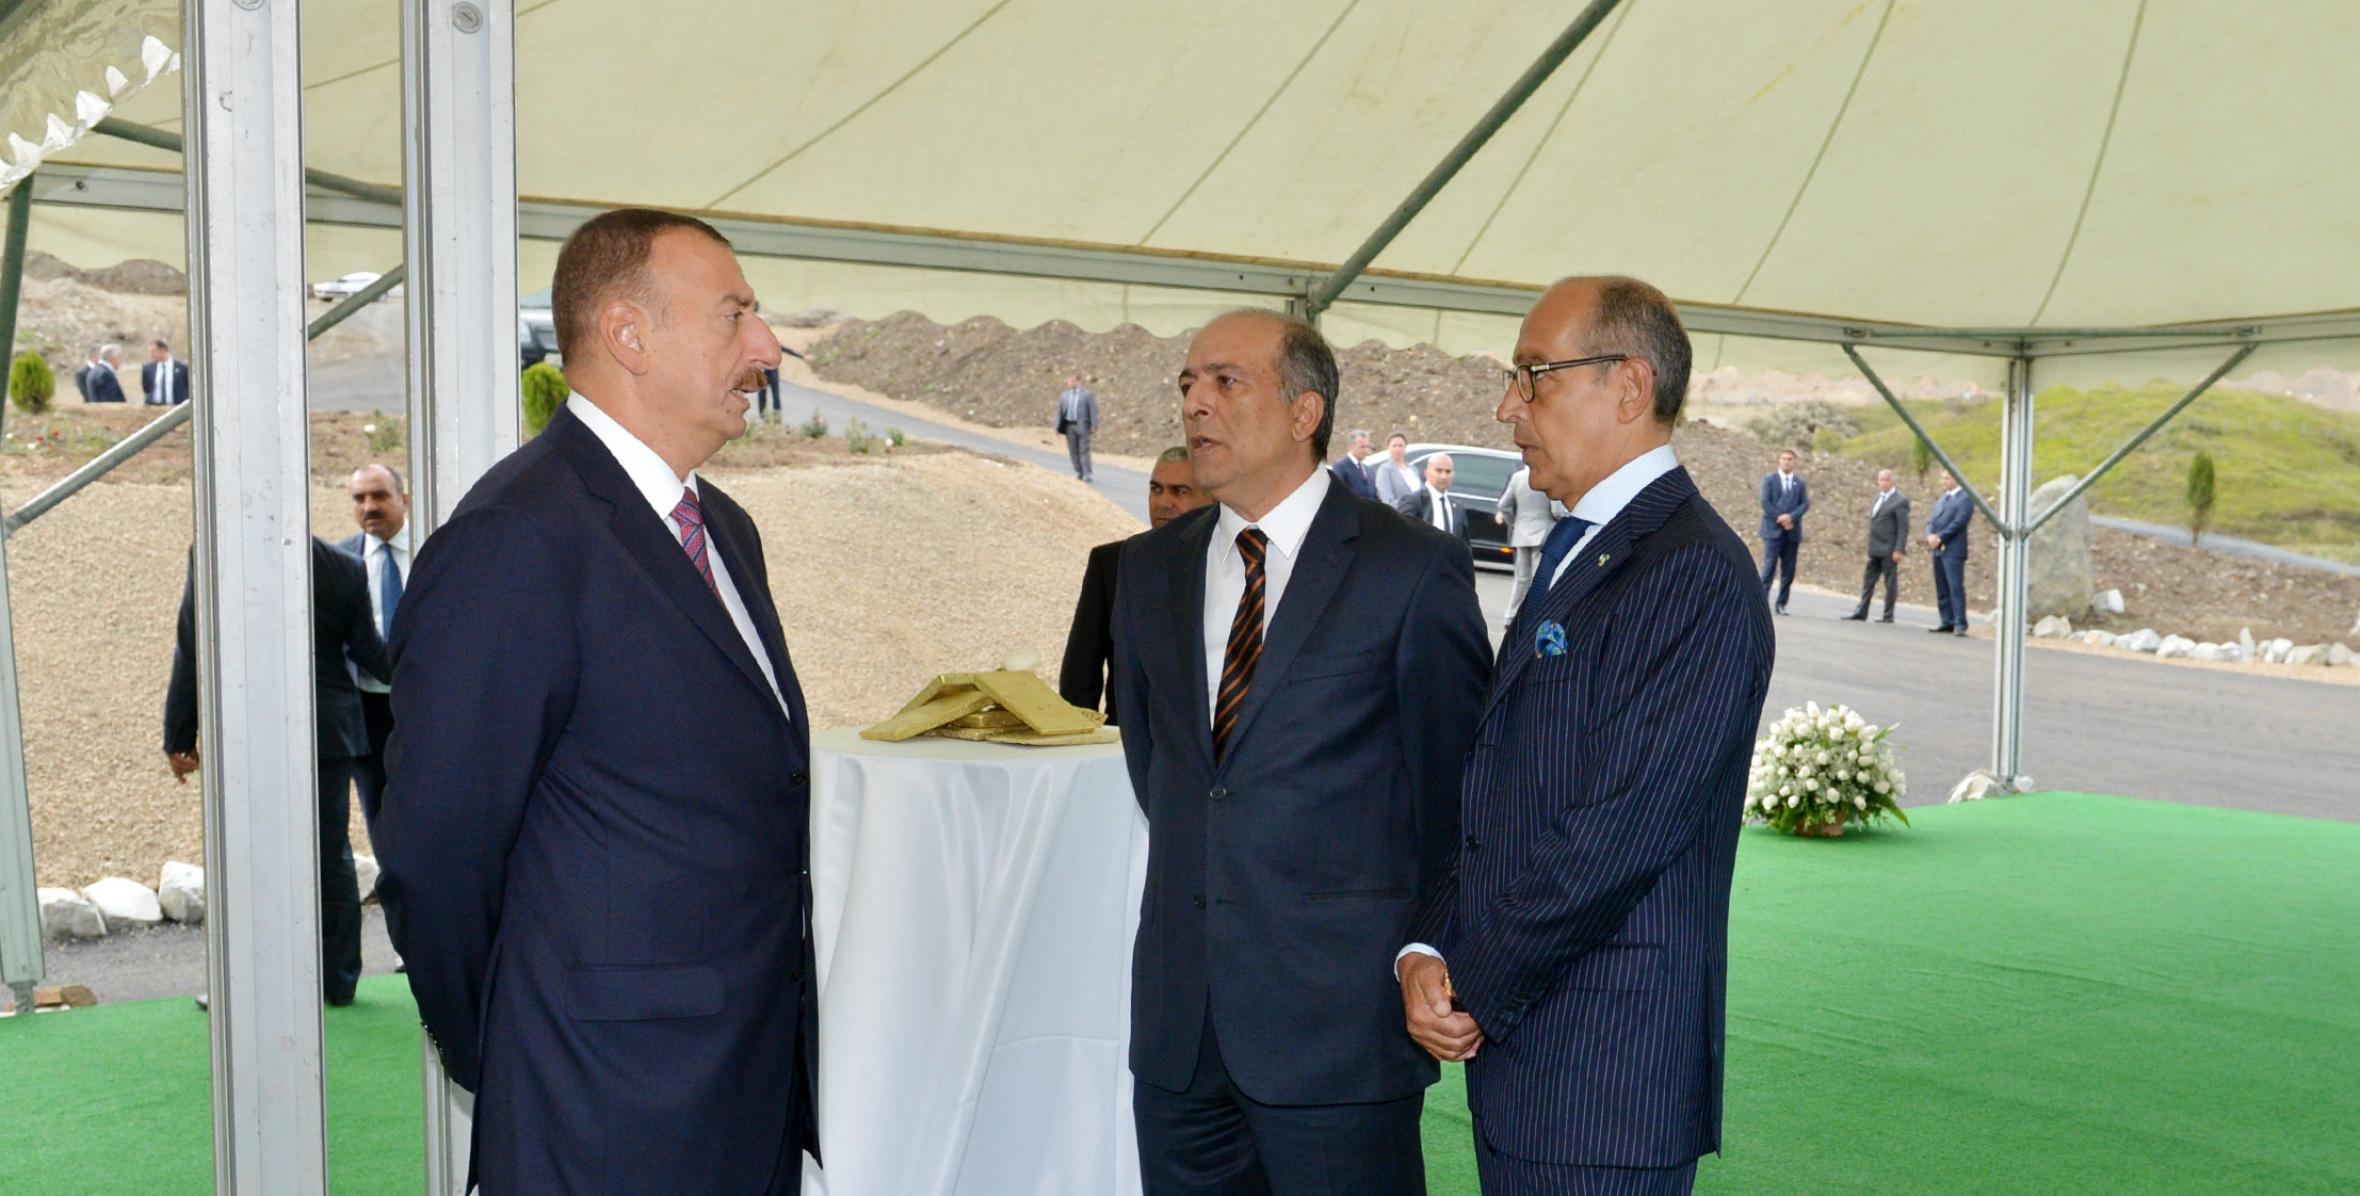 Ilham Aliyev attended the opening of a new plant of “Azerbaijan International Mining Company Limited” in Gadabay